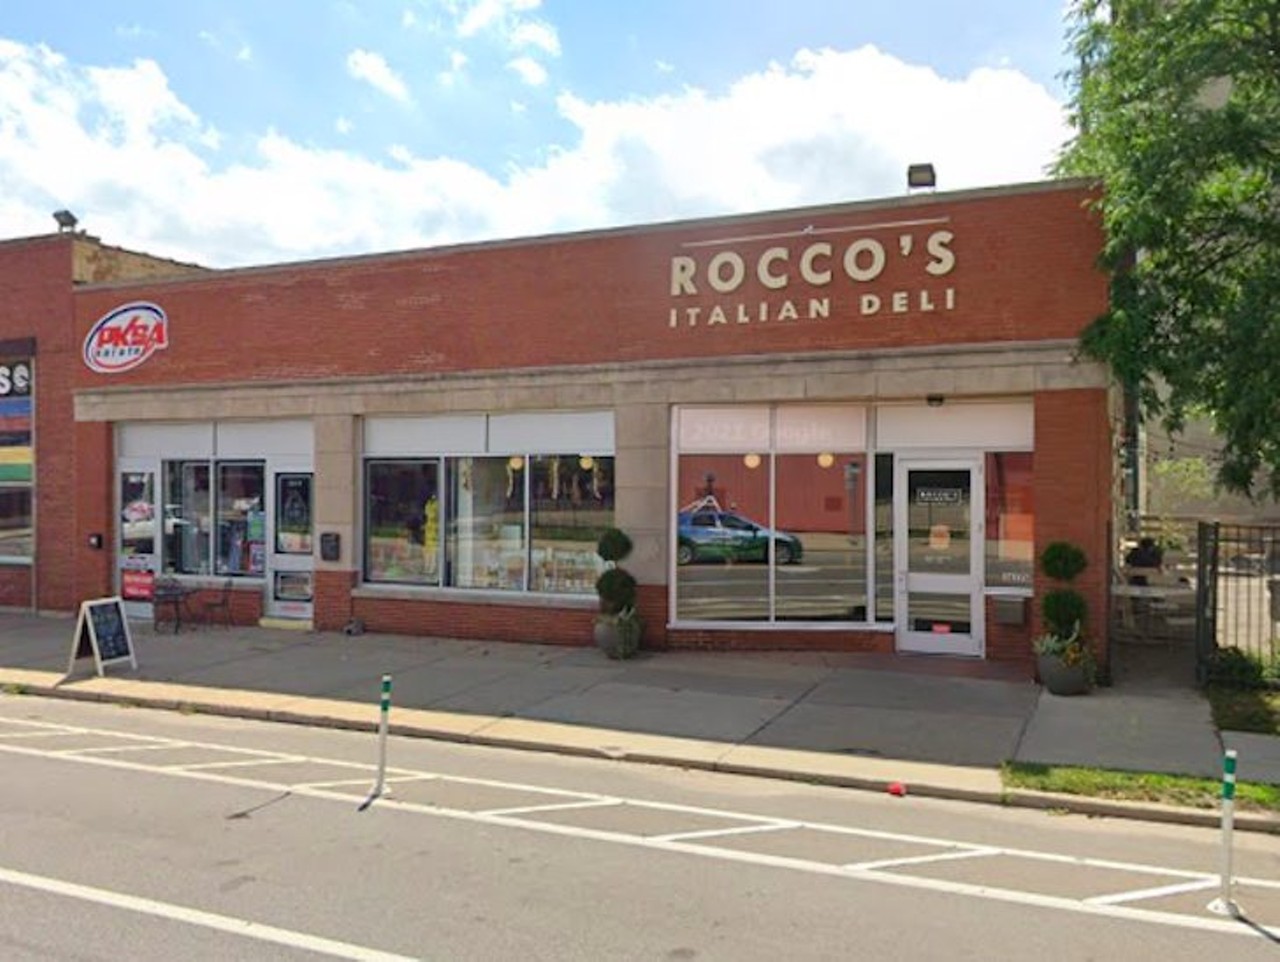 2. Rocco's Italian Deli
3627 Cass Ave., Detroit; 313-315-3033
??
&#147;The Mozz and Mozz sandwich is amazing! This place is the best. 10/10 would recommend to anyone looking for an authentic Italian lunch. Also, super convenient to pick up some awesome imported Italian wine or beer!&#148; - Deanna S.
Photo via Google Maps